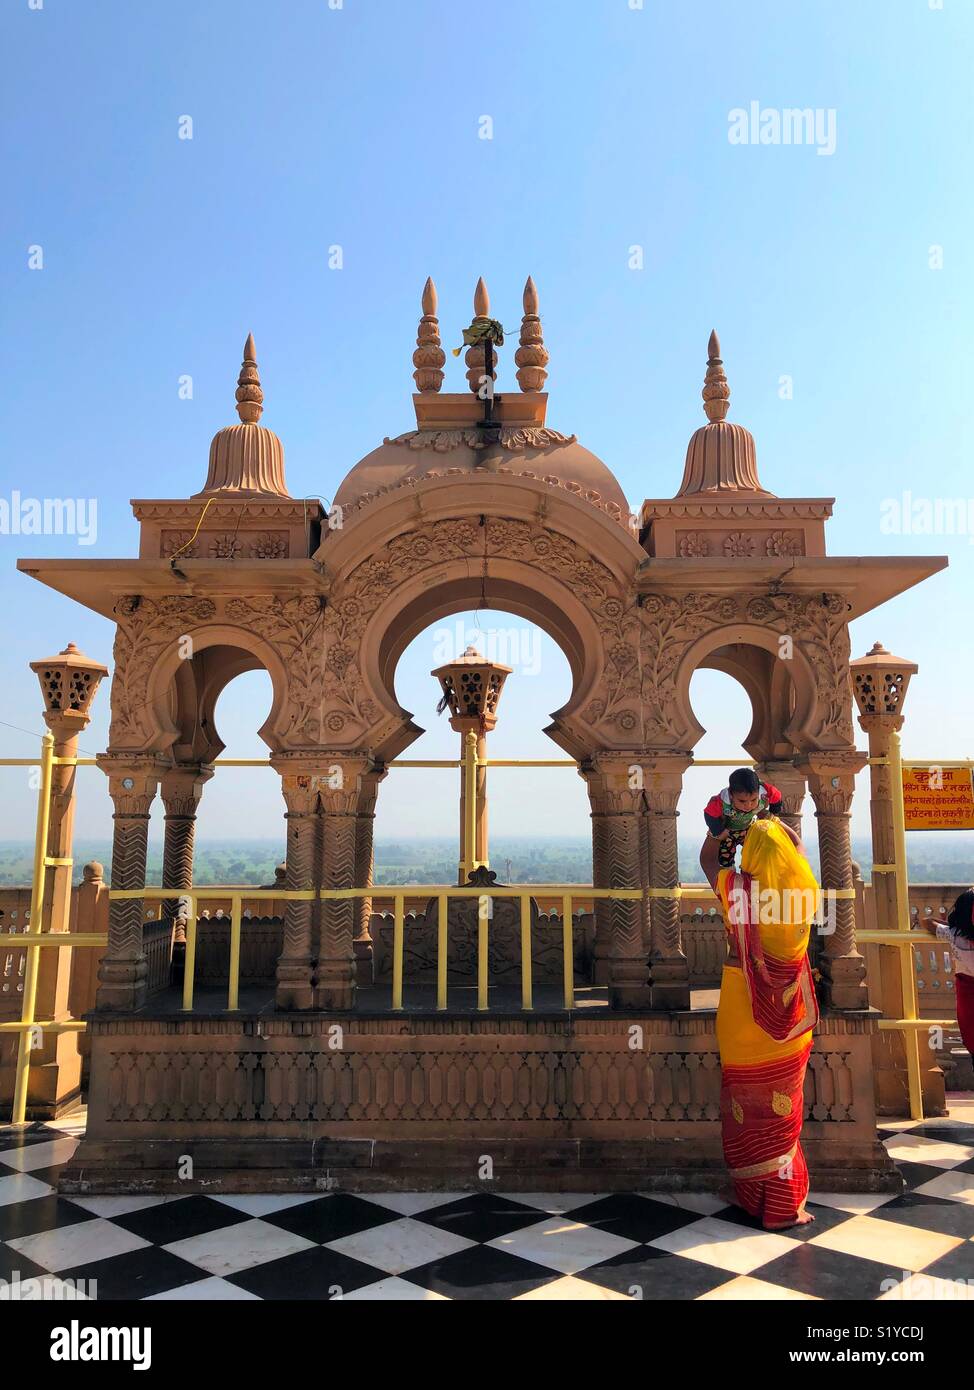 Top view of Shri Radha Rani Temple in Barsana city in Uttar Pradesh, India. Mother and child visiting temple in India. Stock Photo